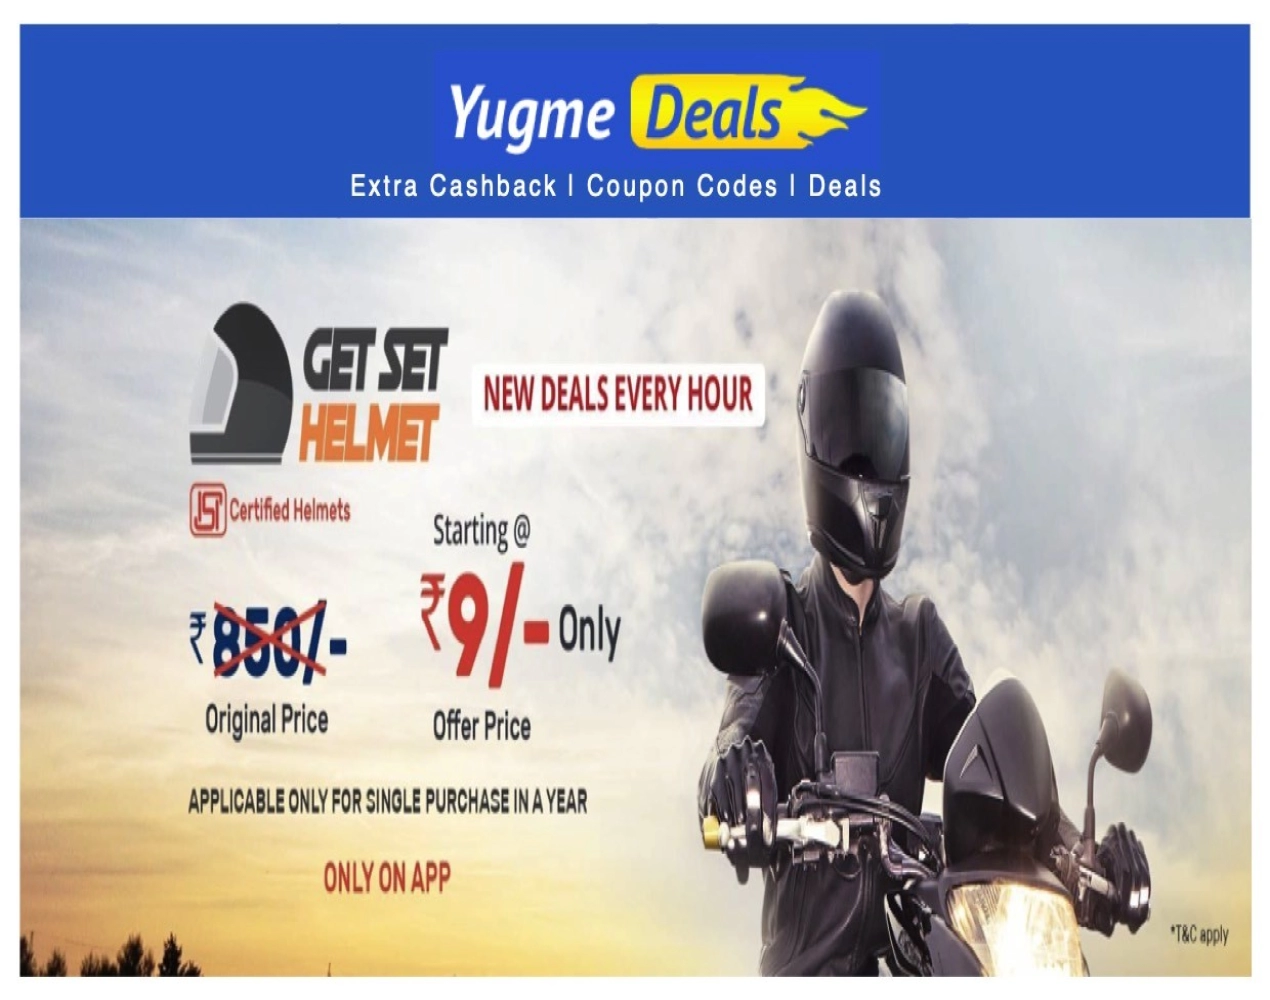 Droom Get Set Helmet Sale - Buy Helmet from Rs.9 only on 10th March at 10Am to 6Pm